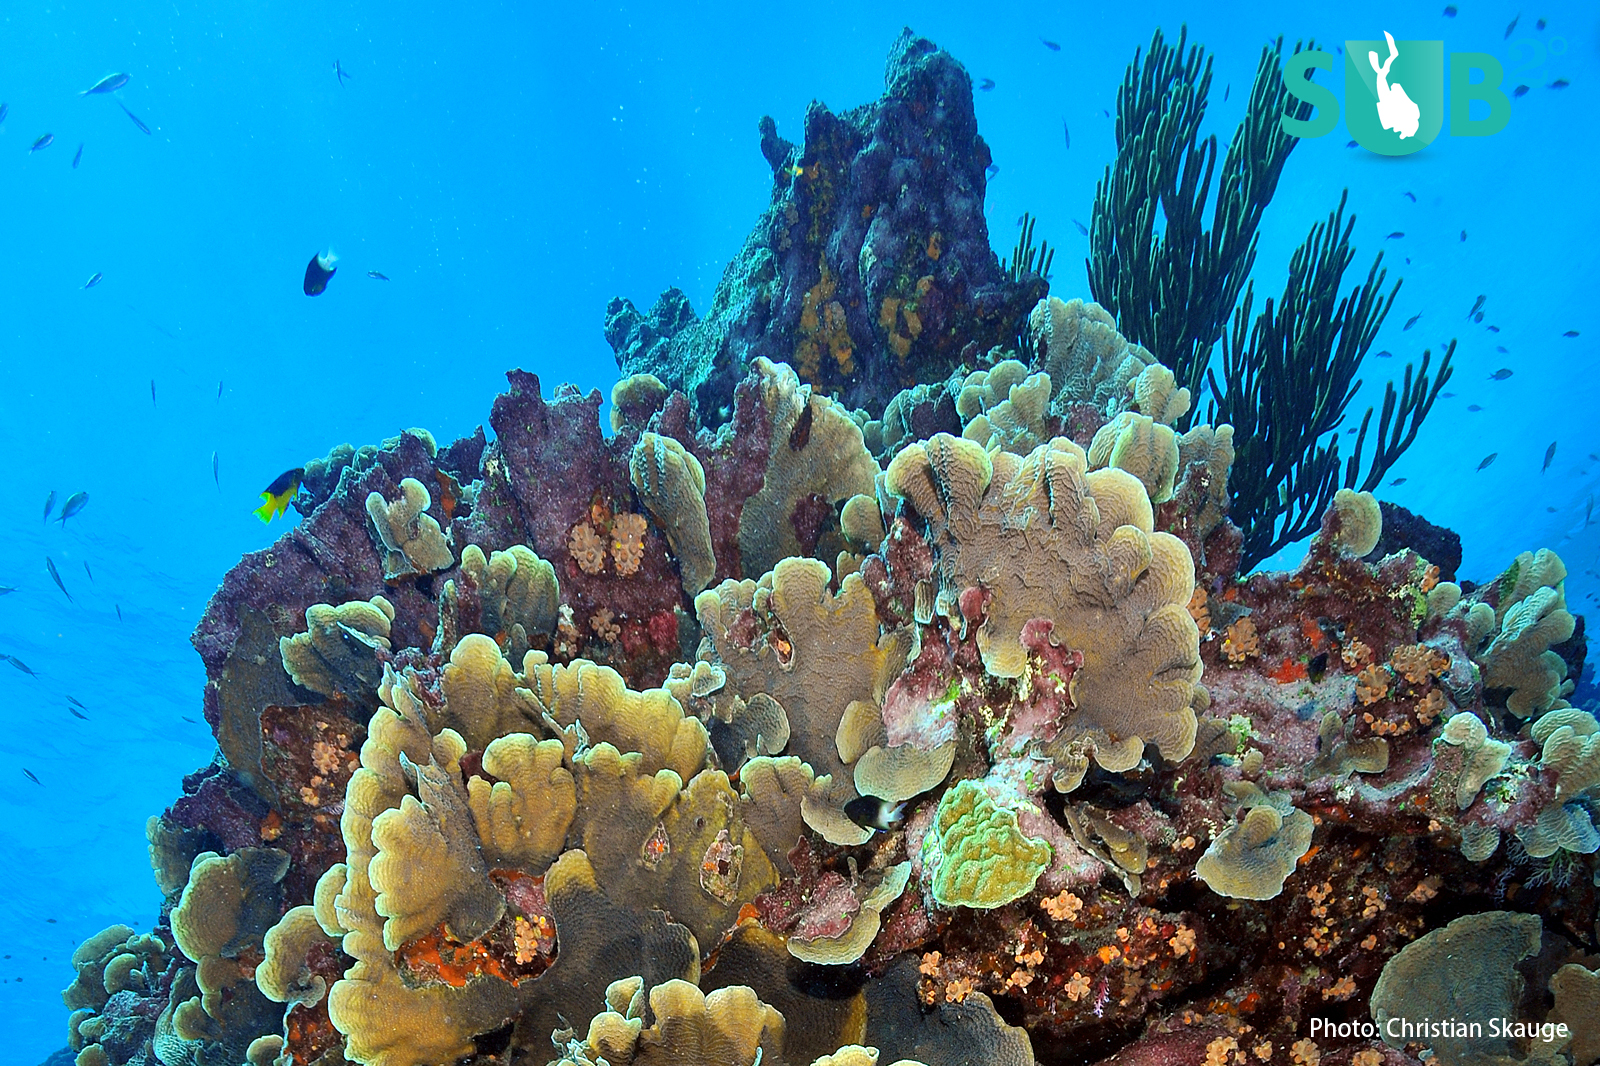 A colourful and healthy coral reef- the 'Rainforest' of the sea